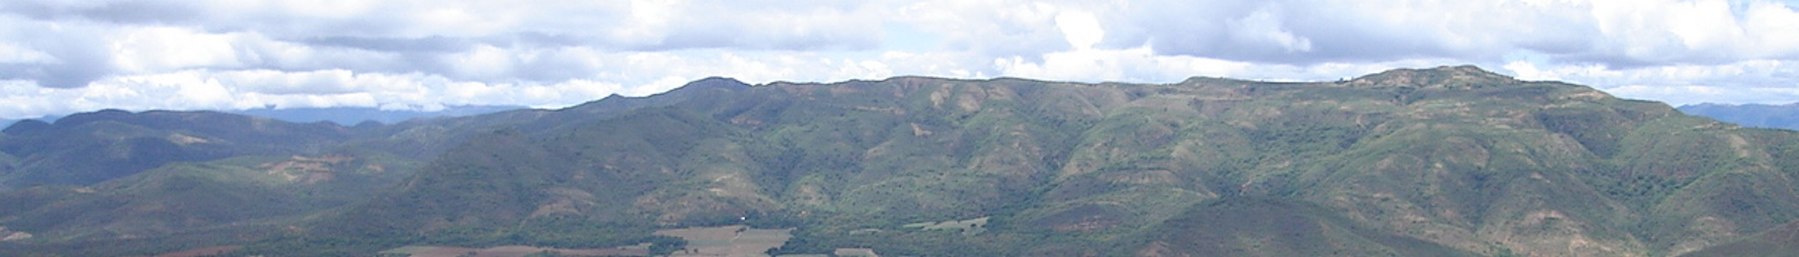 WV banner Tropical Lowlands Mountains above Comarpa.jpg